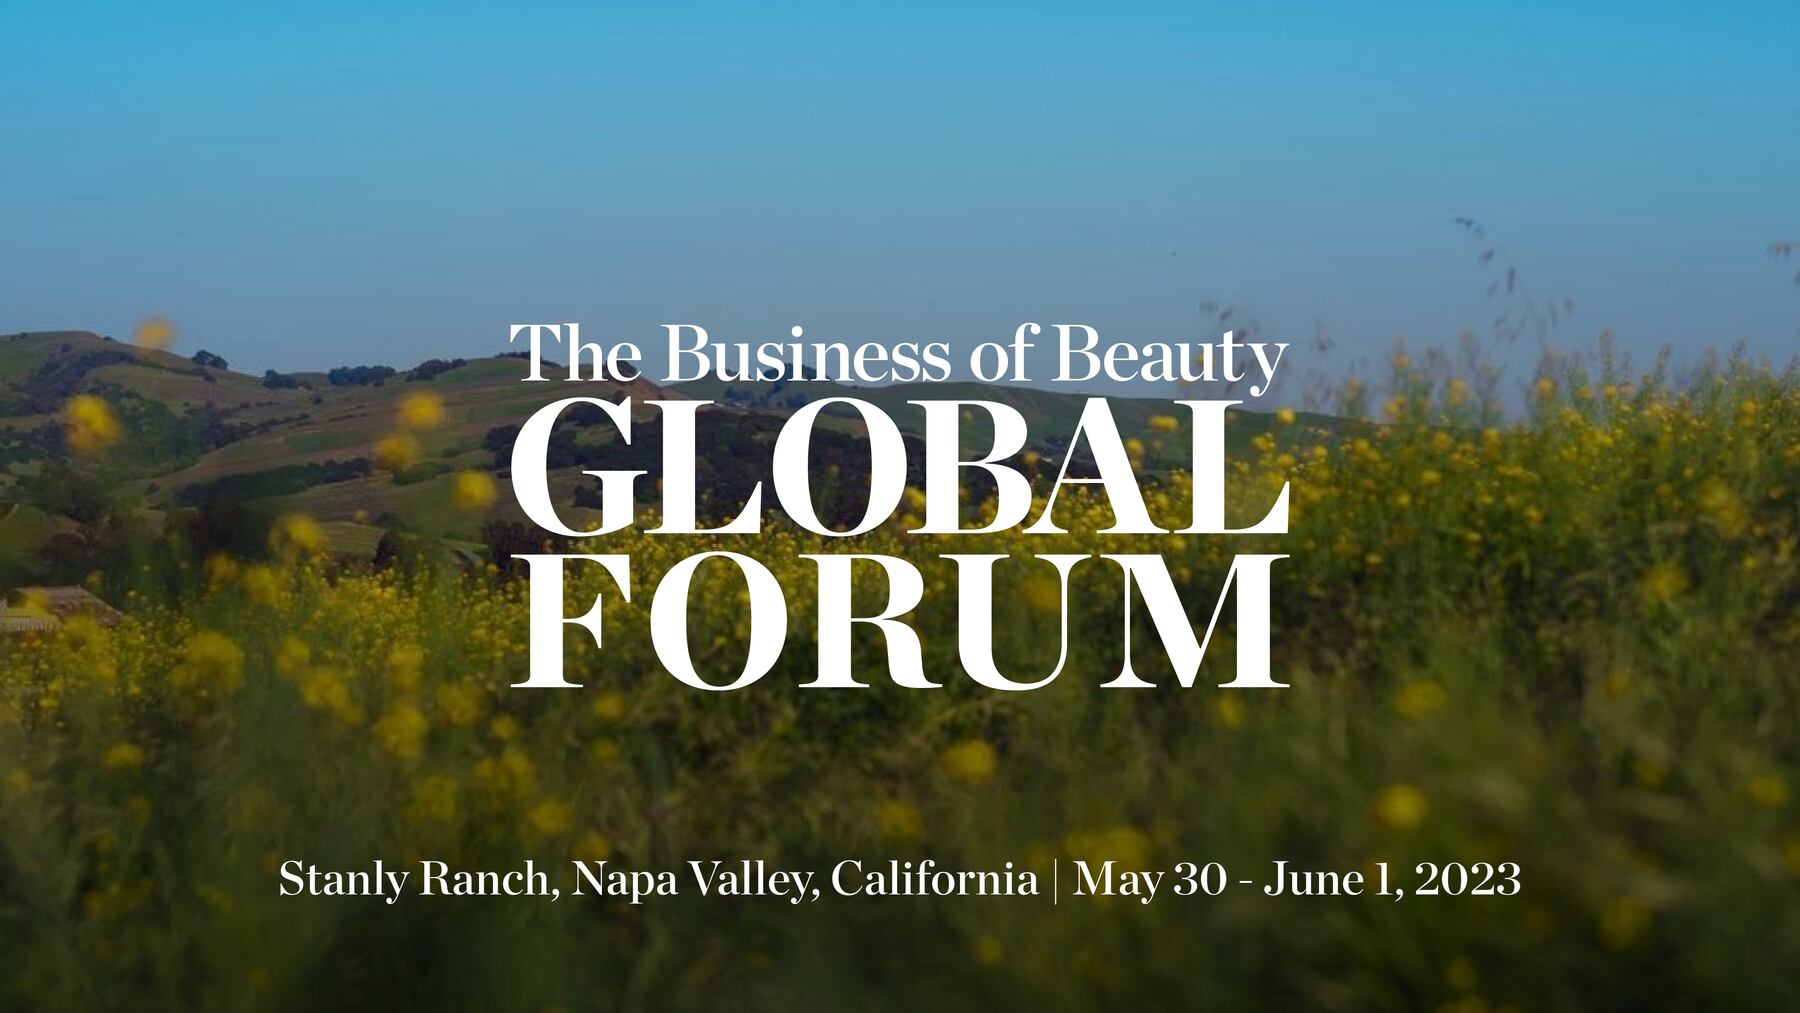 The Business of Beauty Global Forum is coming to California.